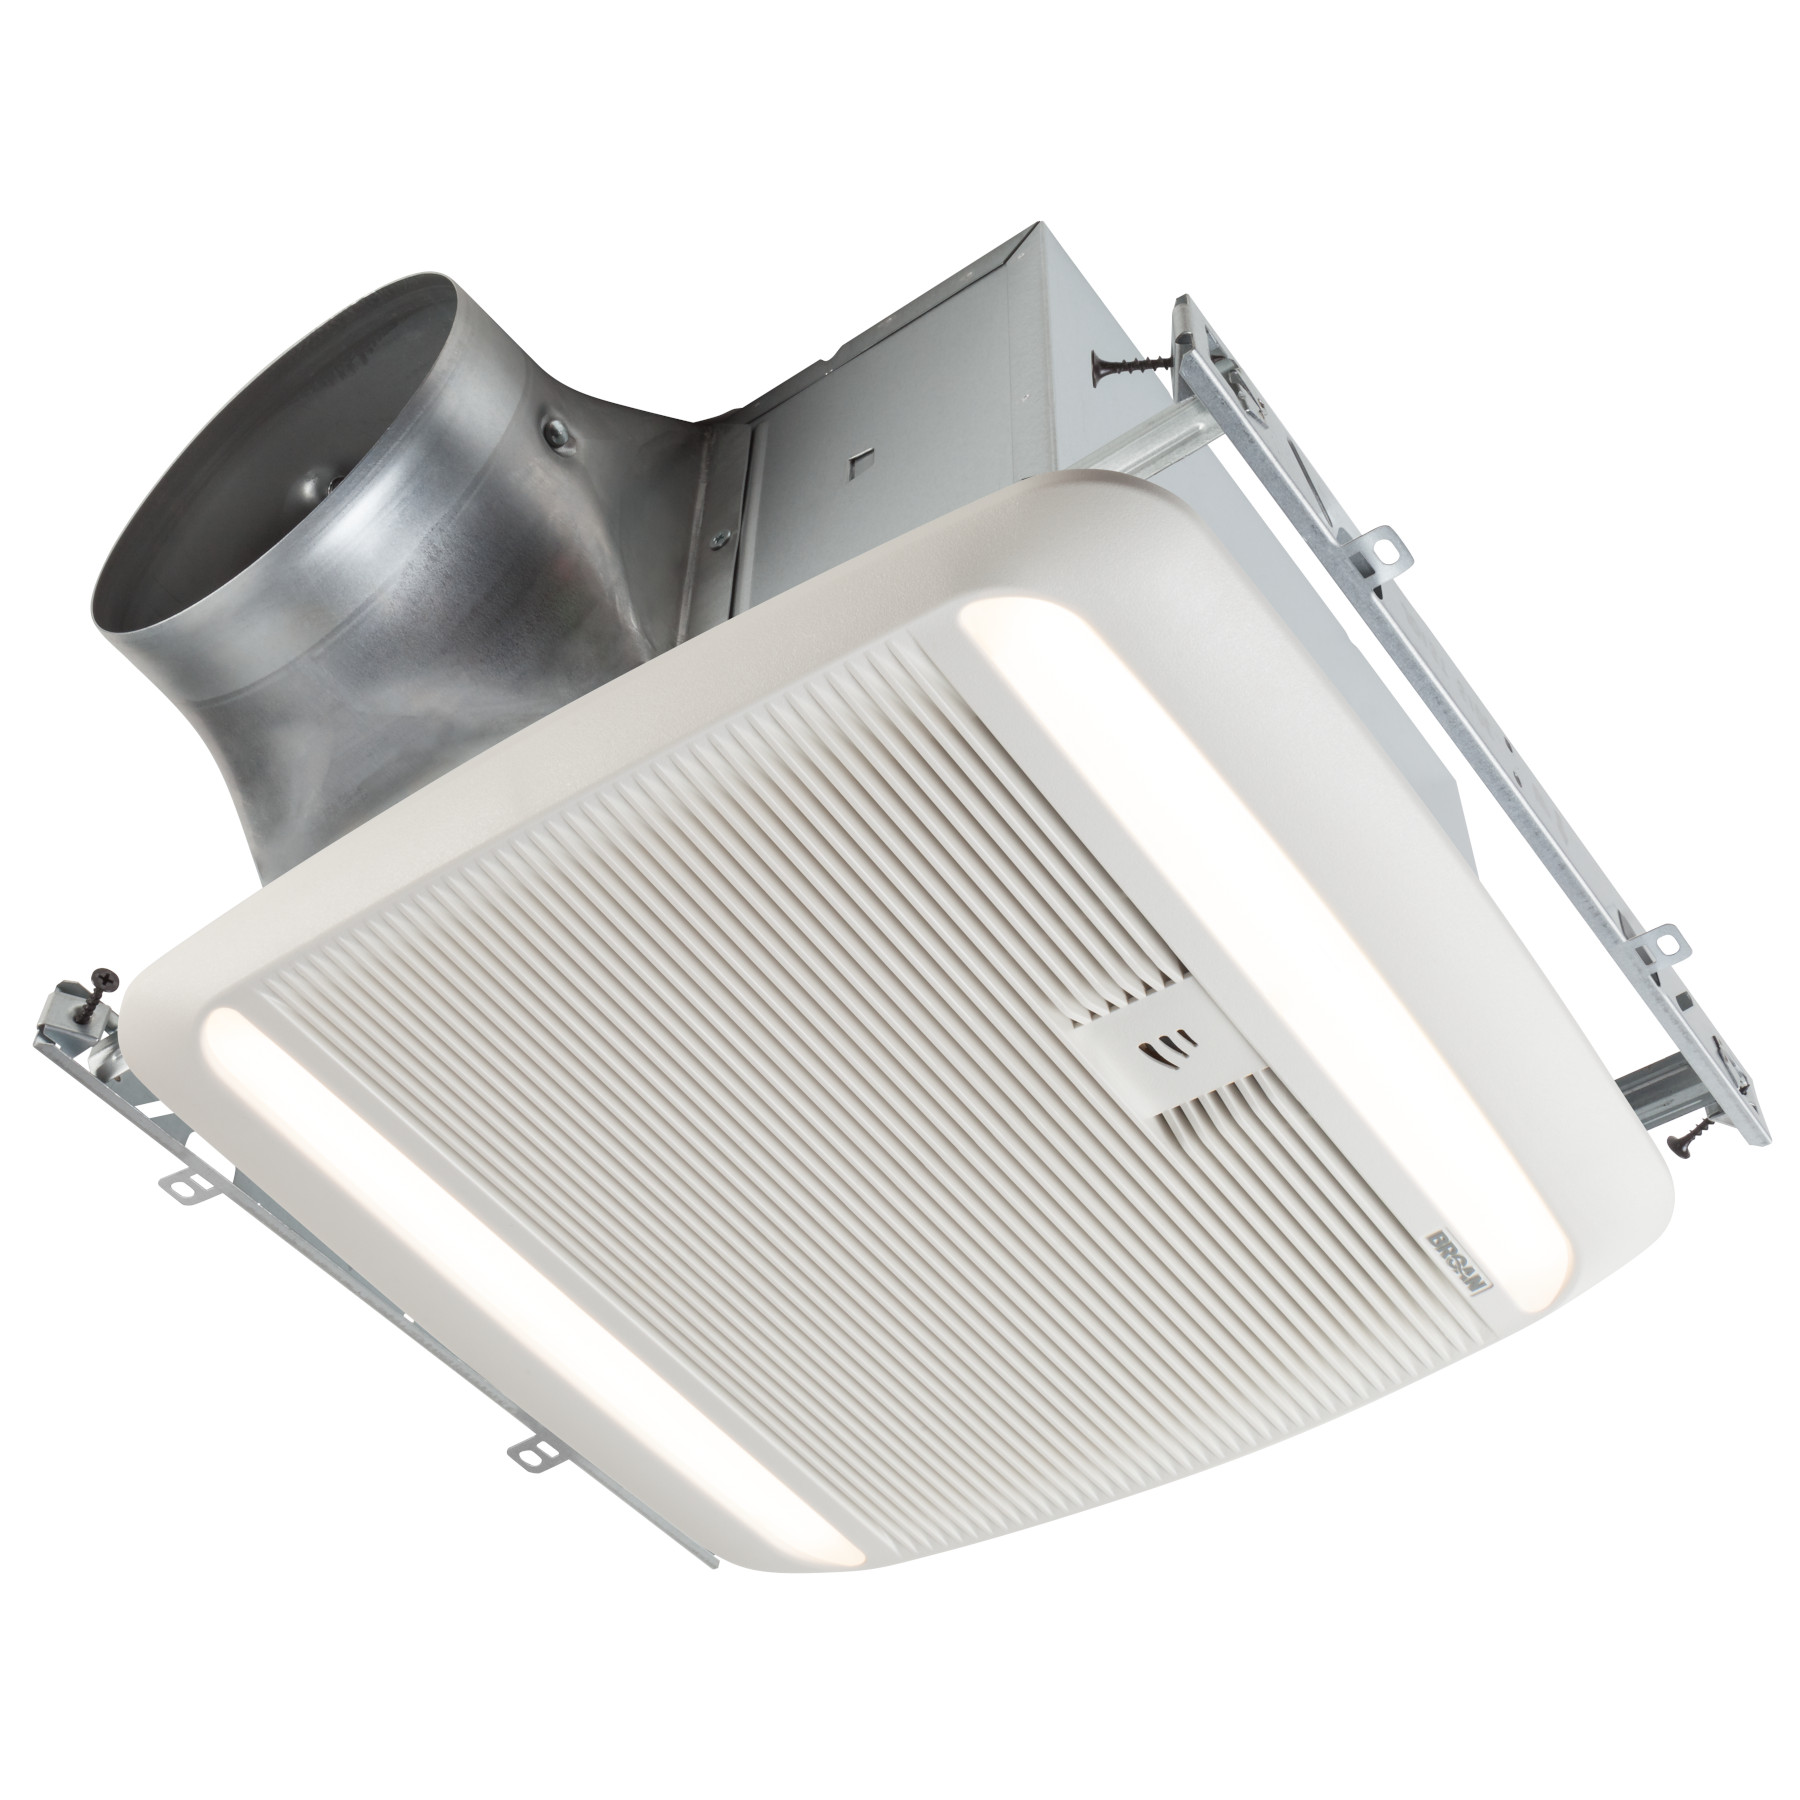 ULTRA GREEN ZB Series 110 CFM Multi-Speed Bathroom Exhaust Fan w/LED Light and Humidity Sensing, ENERGY STAR® certified